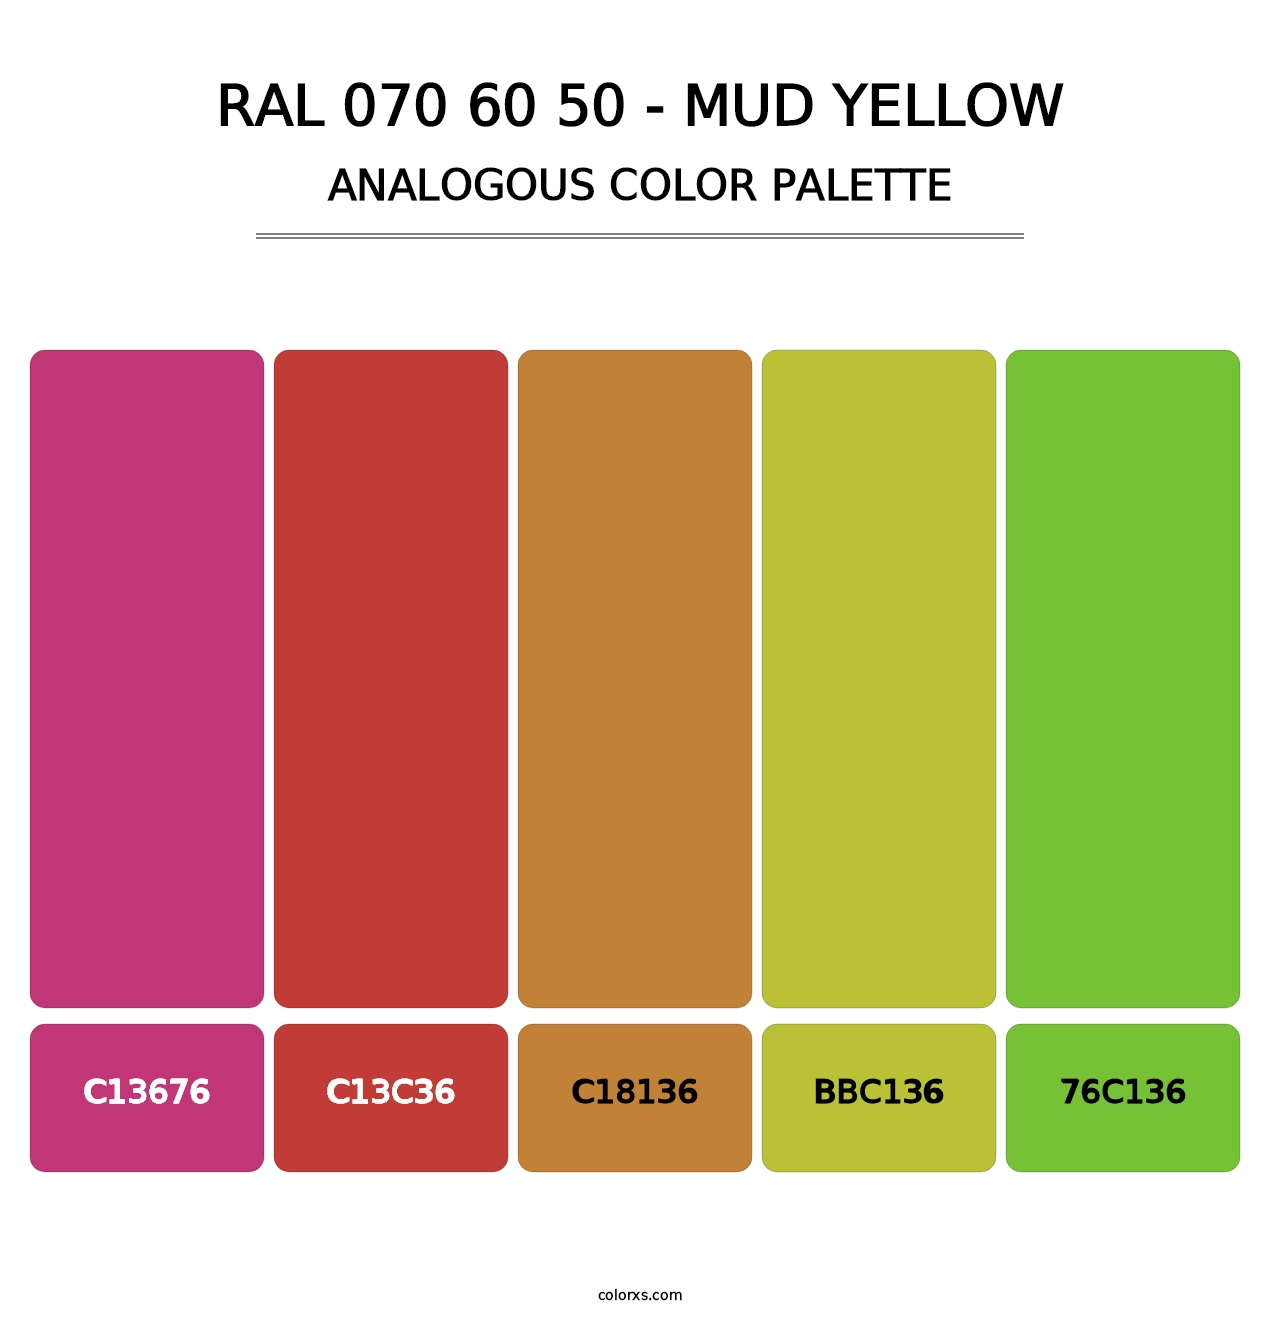 RAL 070 60 50 - Mud Yellow - Analogous Color Palette